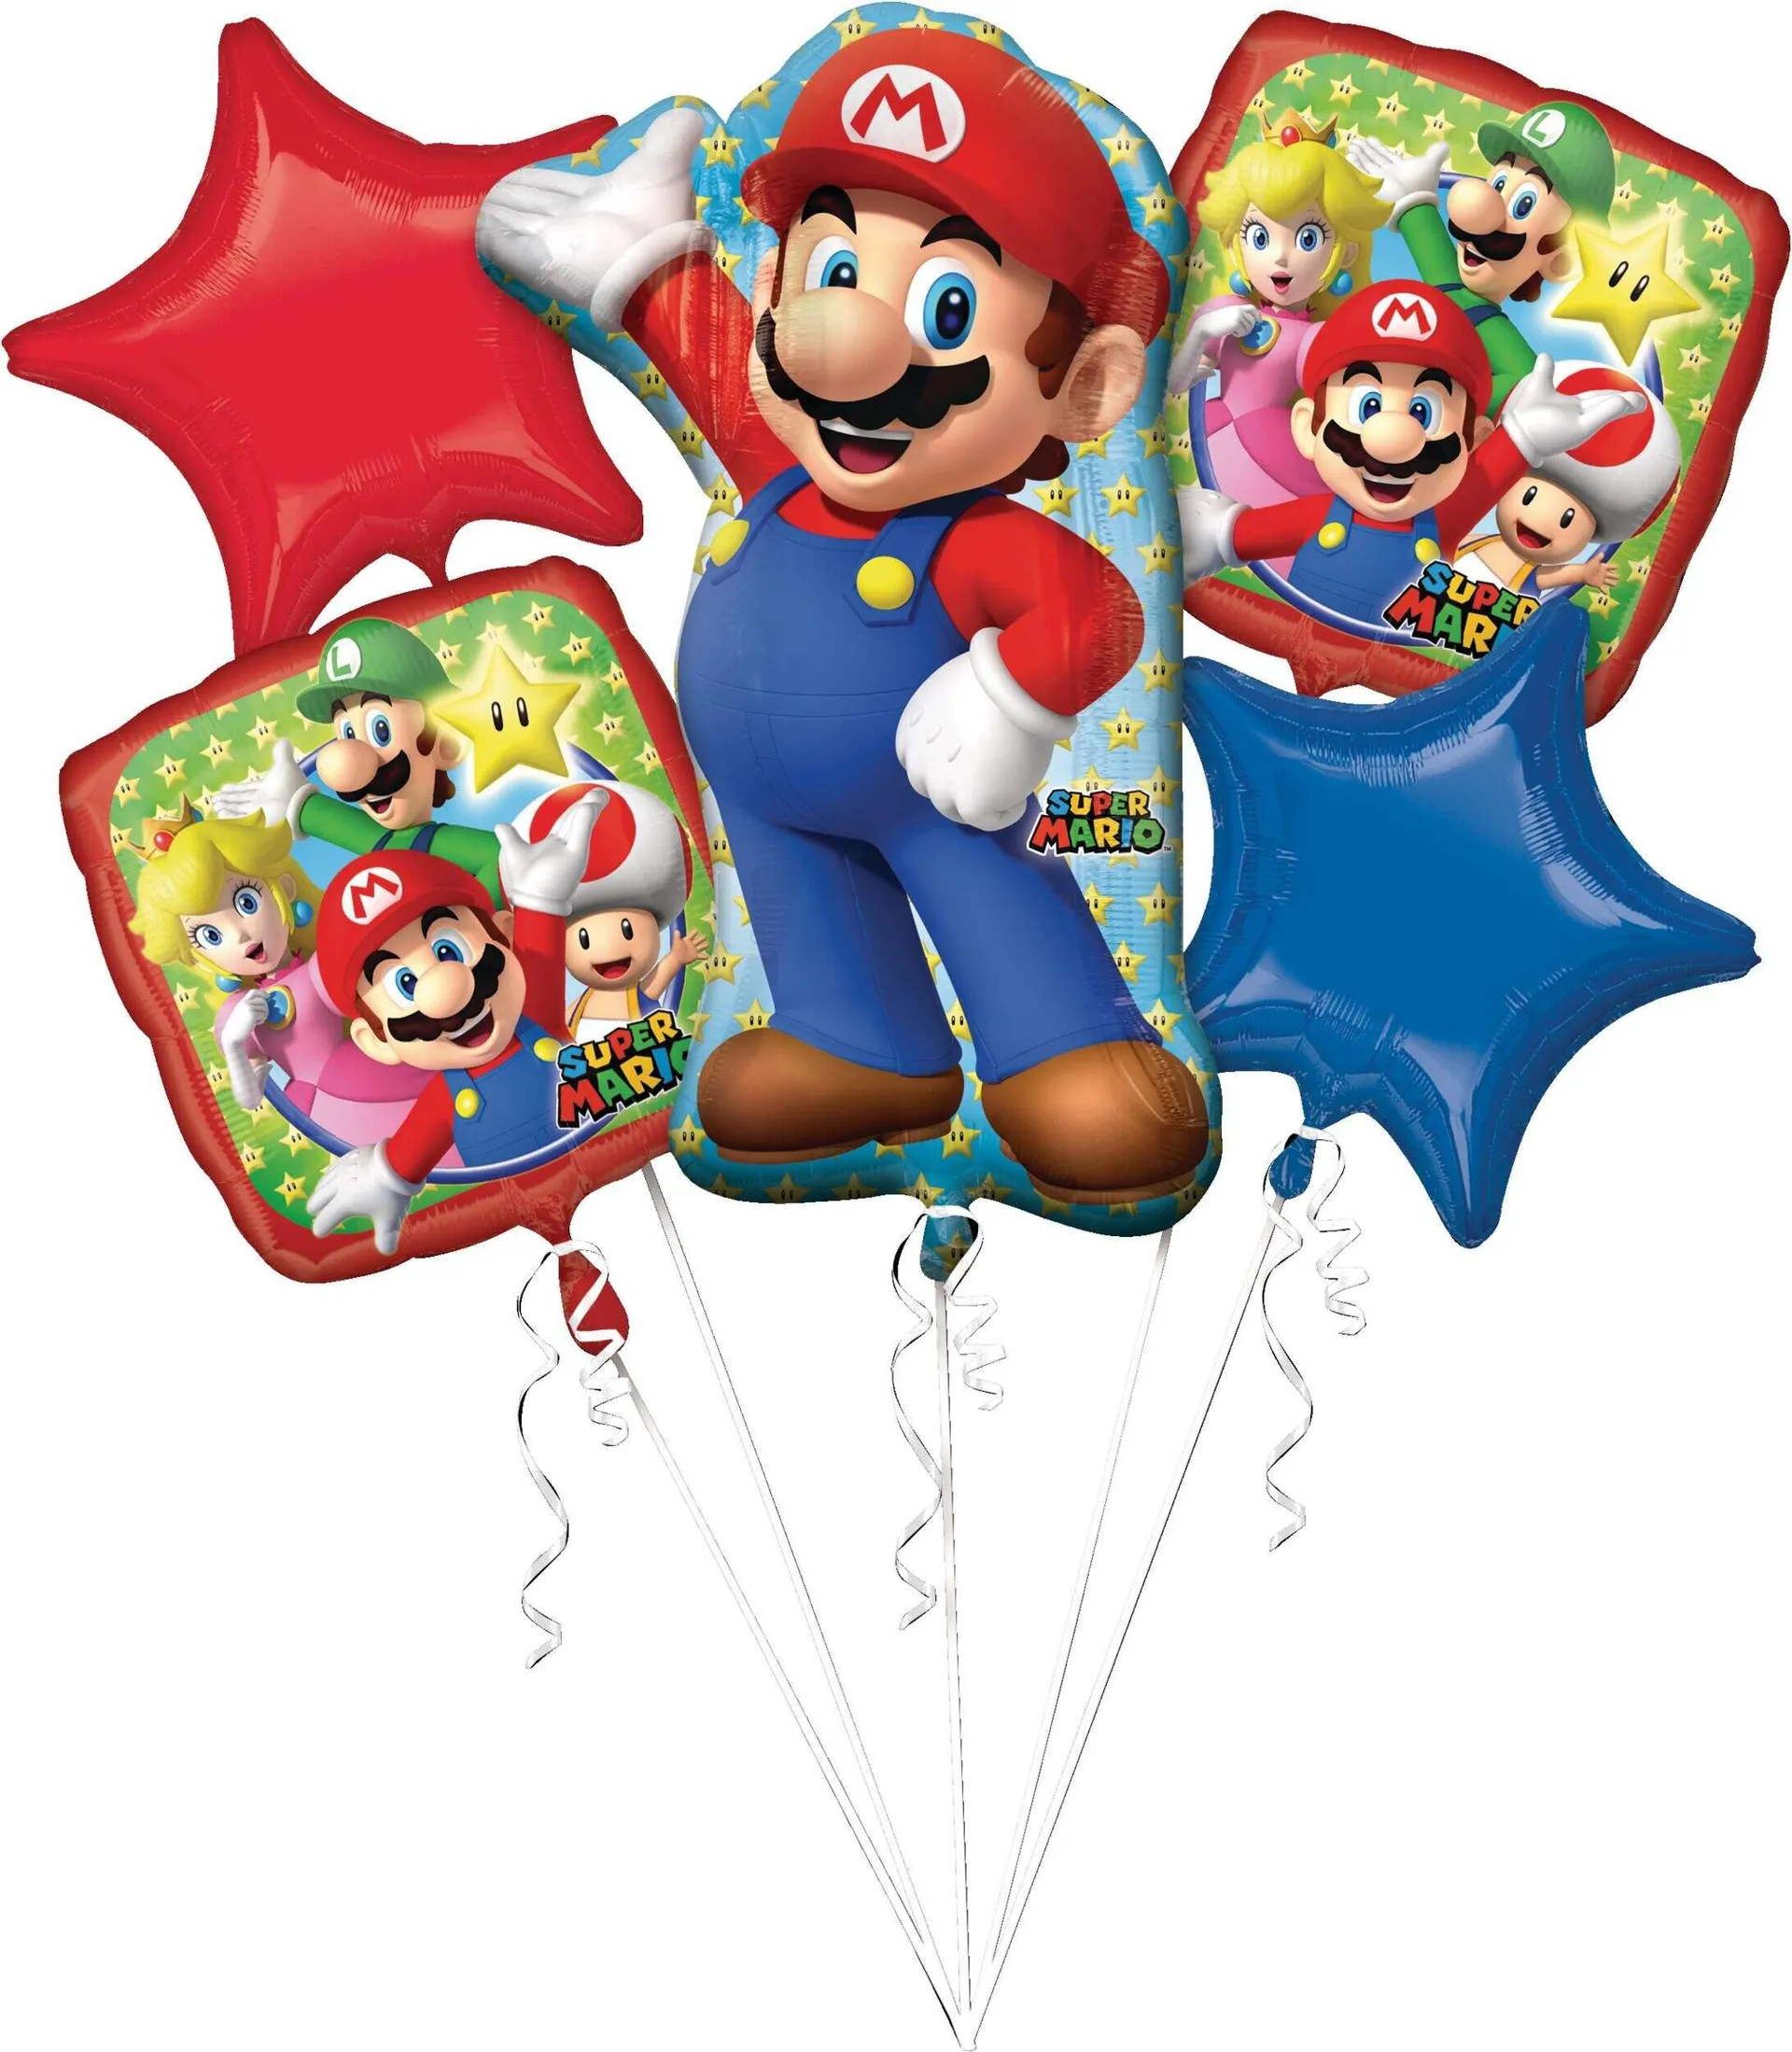 Nintendo Super Mario Bros Star/Square Satin Foil Balloon Bouquet, Blue/Red, 5-pk, Helium Inflation & Ribbon Included for Birthday Party